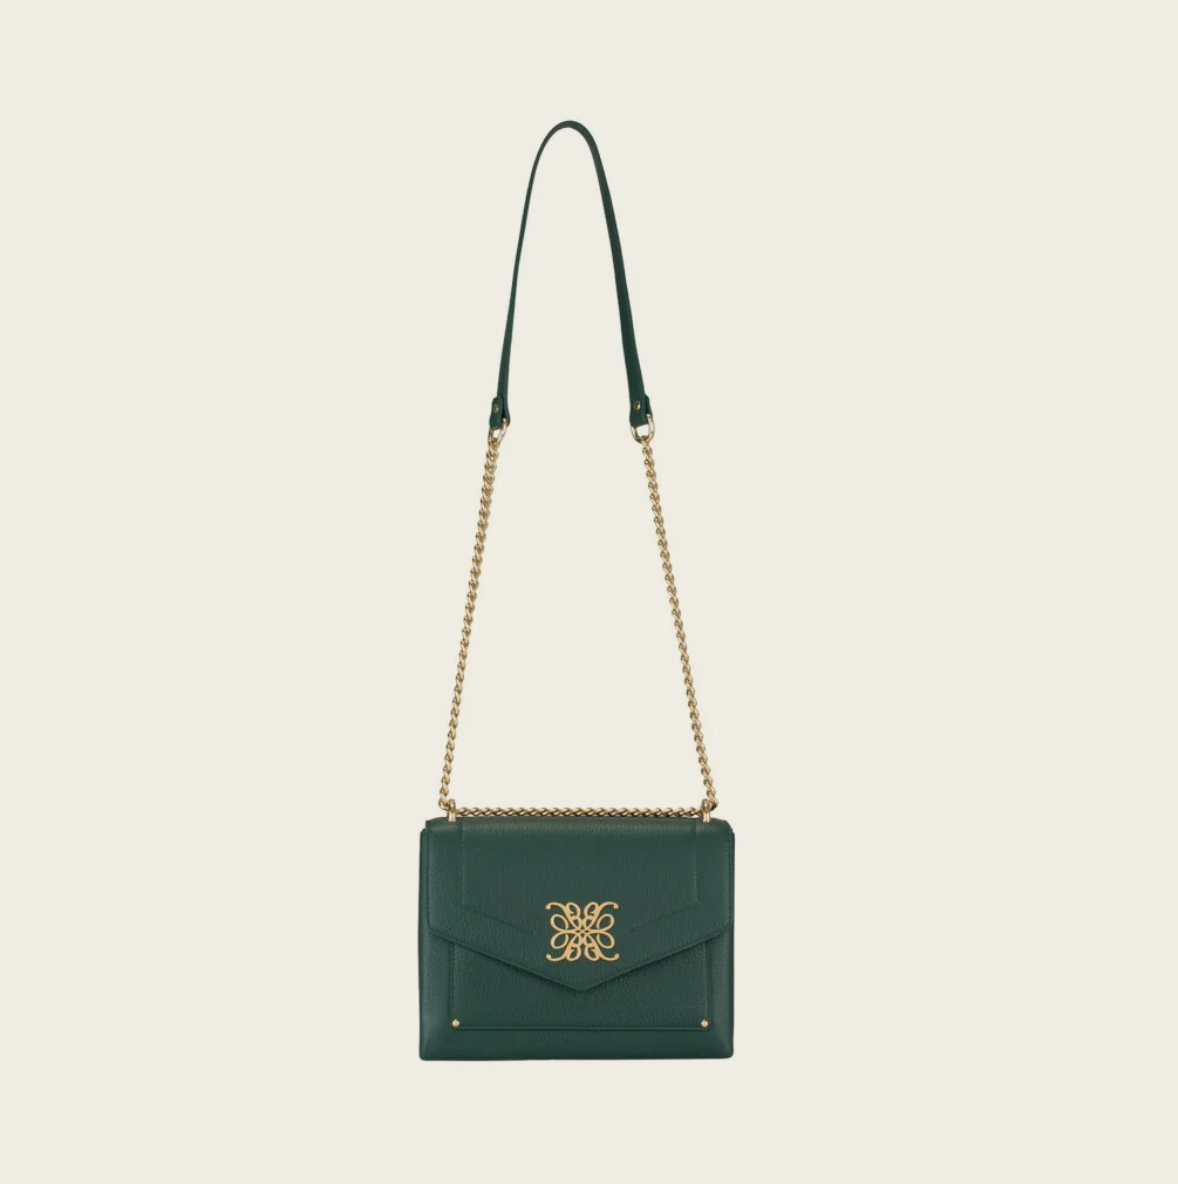 Italian handcrafted bag collections at Via Neapolis.